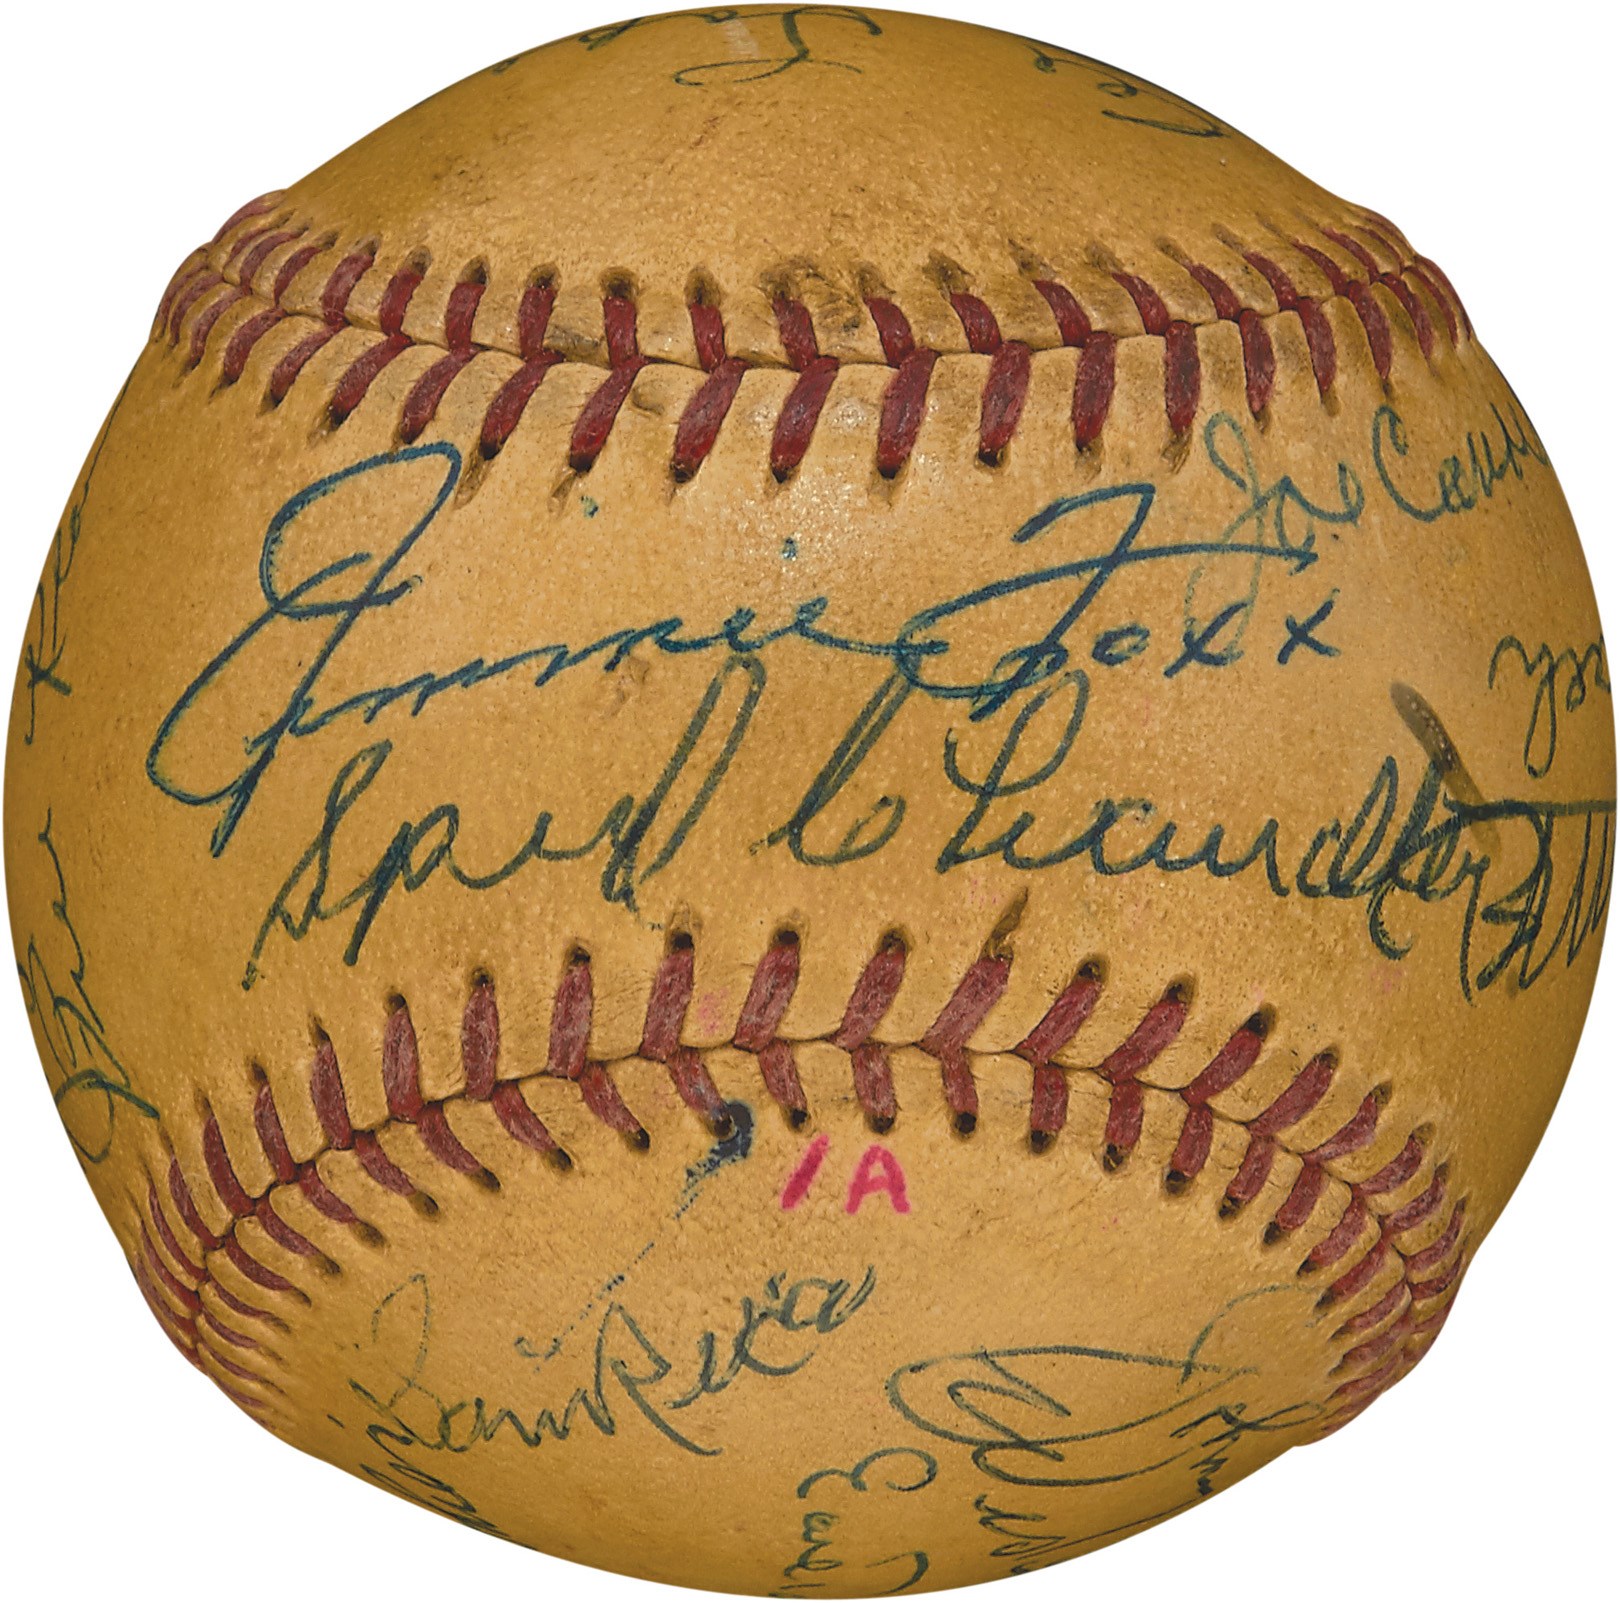 - 1956 "March of Dimes" Old Timers Day Signed Baseball w/Jimmie Foxx